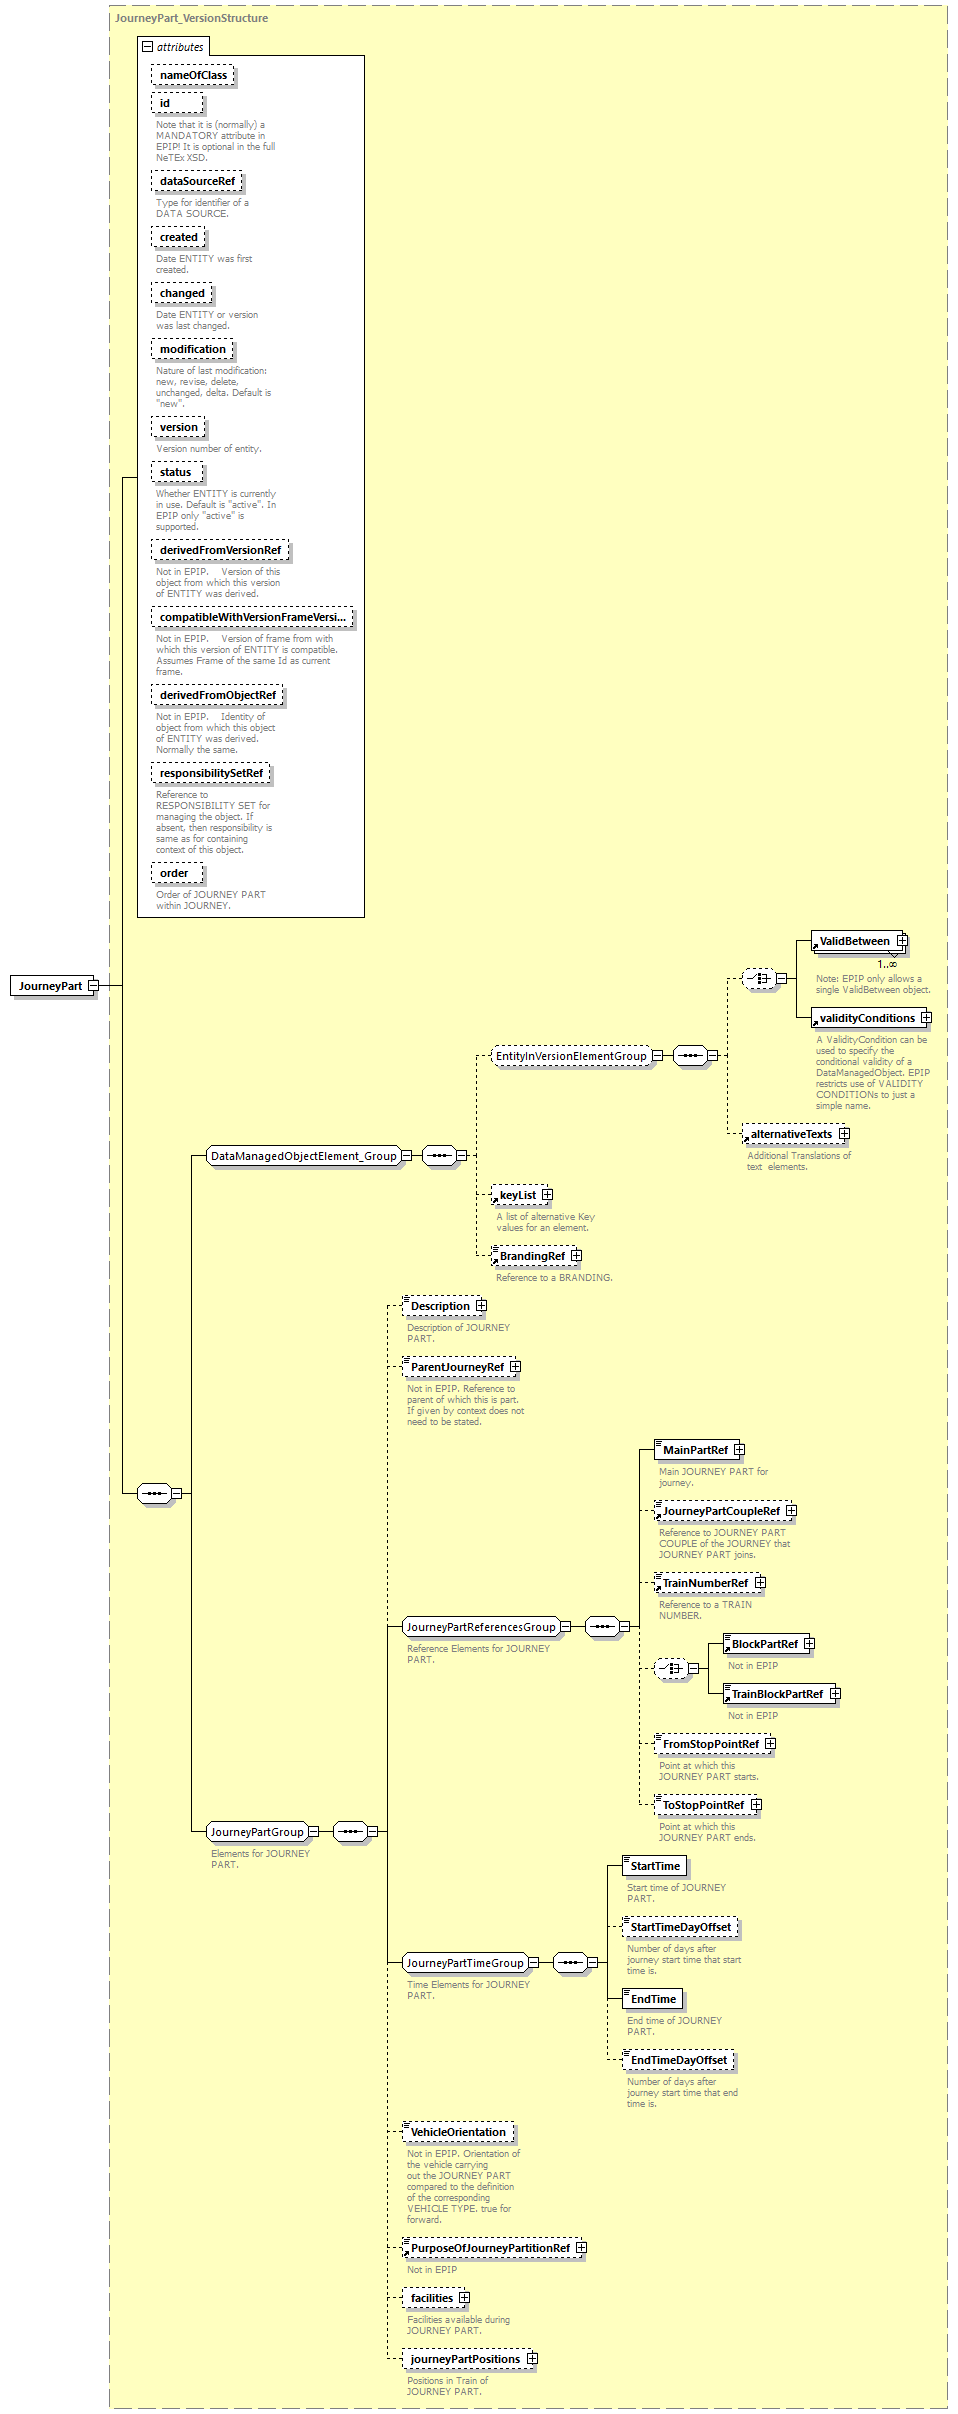 reduced_diagrams/reduced_p209.png